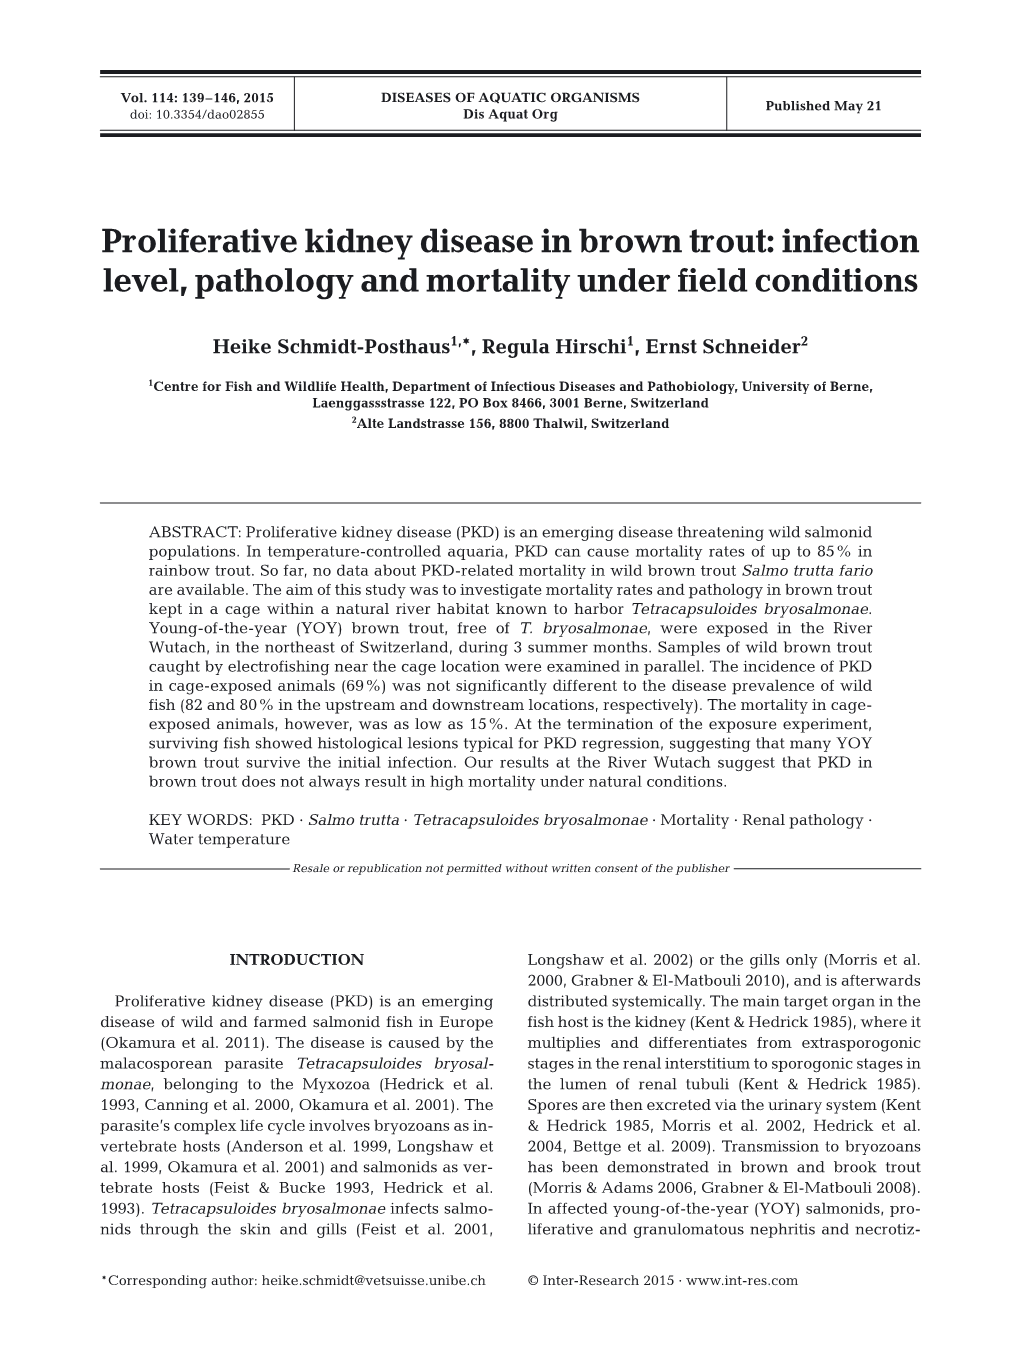 Proliferative Kidney Disease in Brown Trout: Infection Level, Pathology and Mortality Under Field Conditions